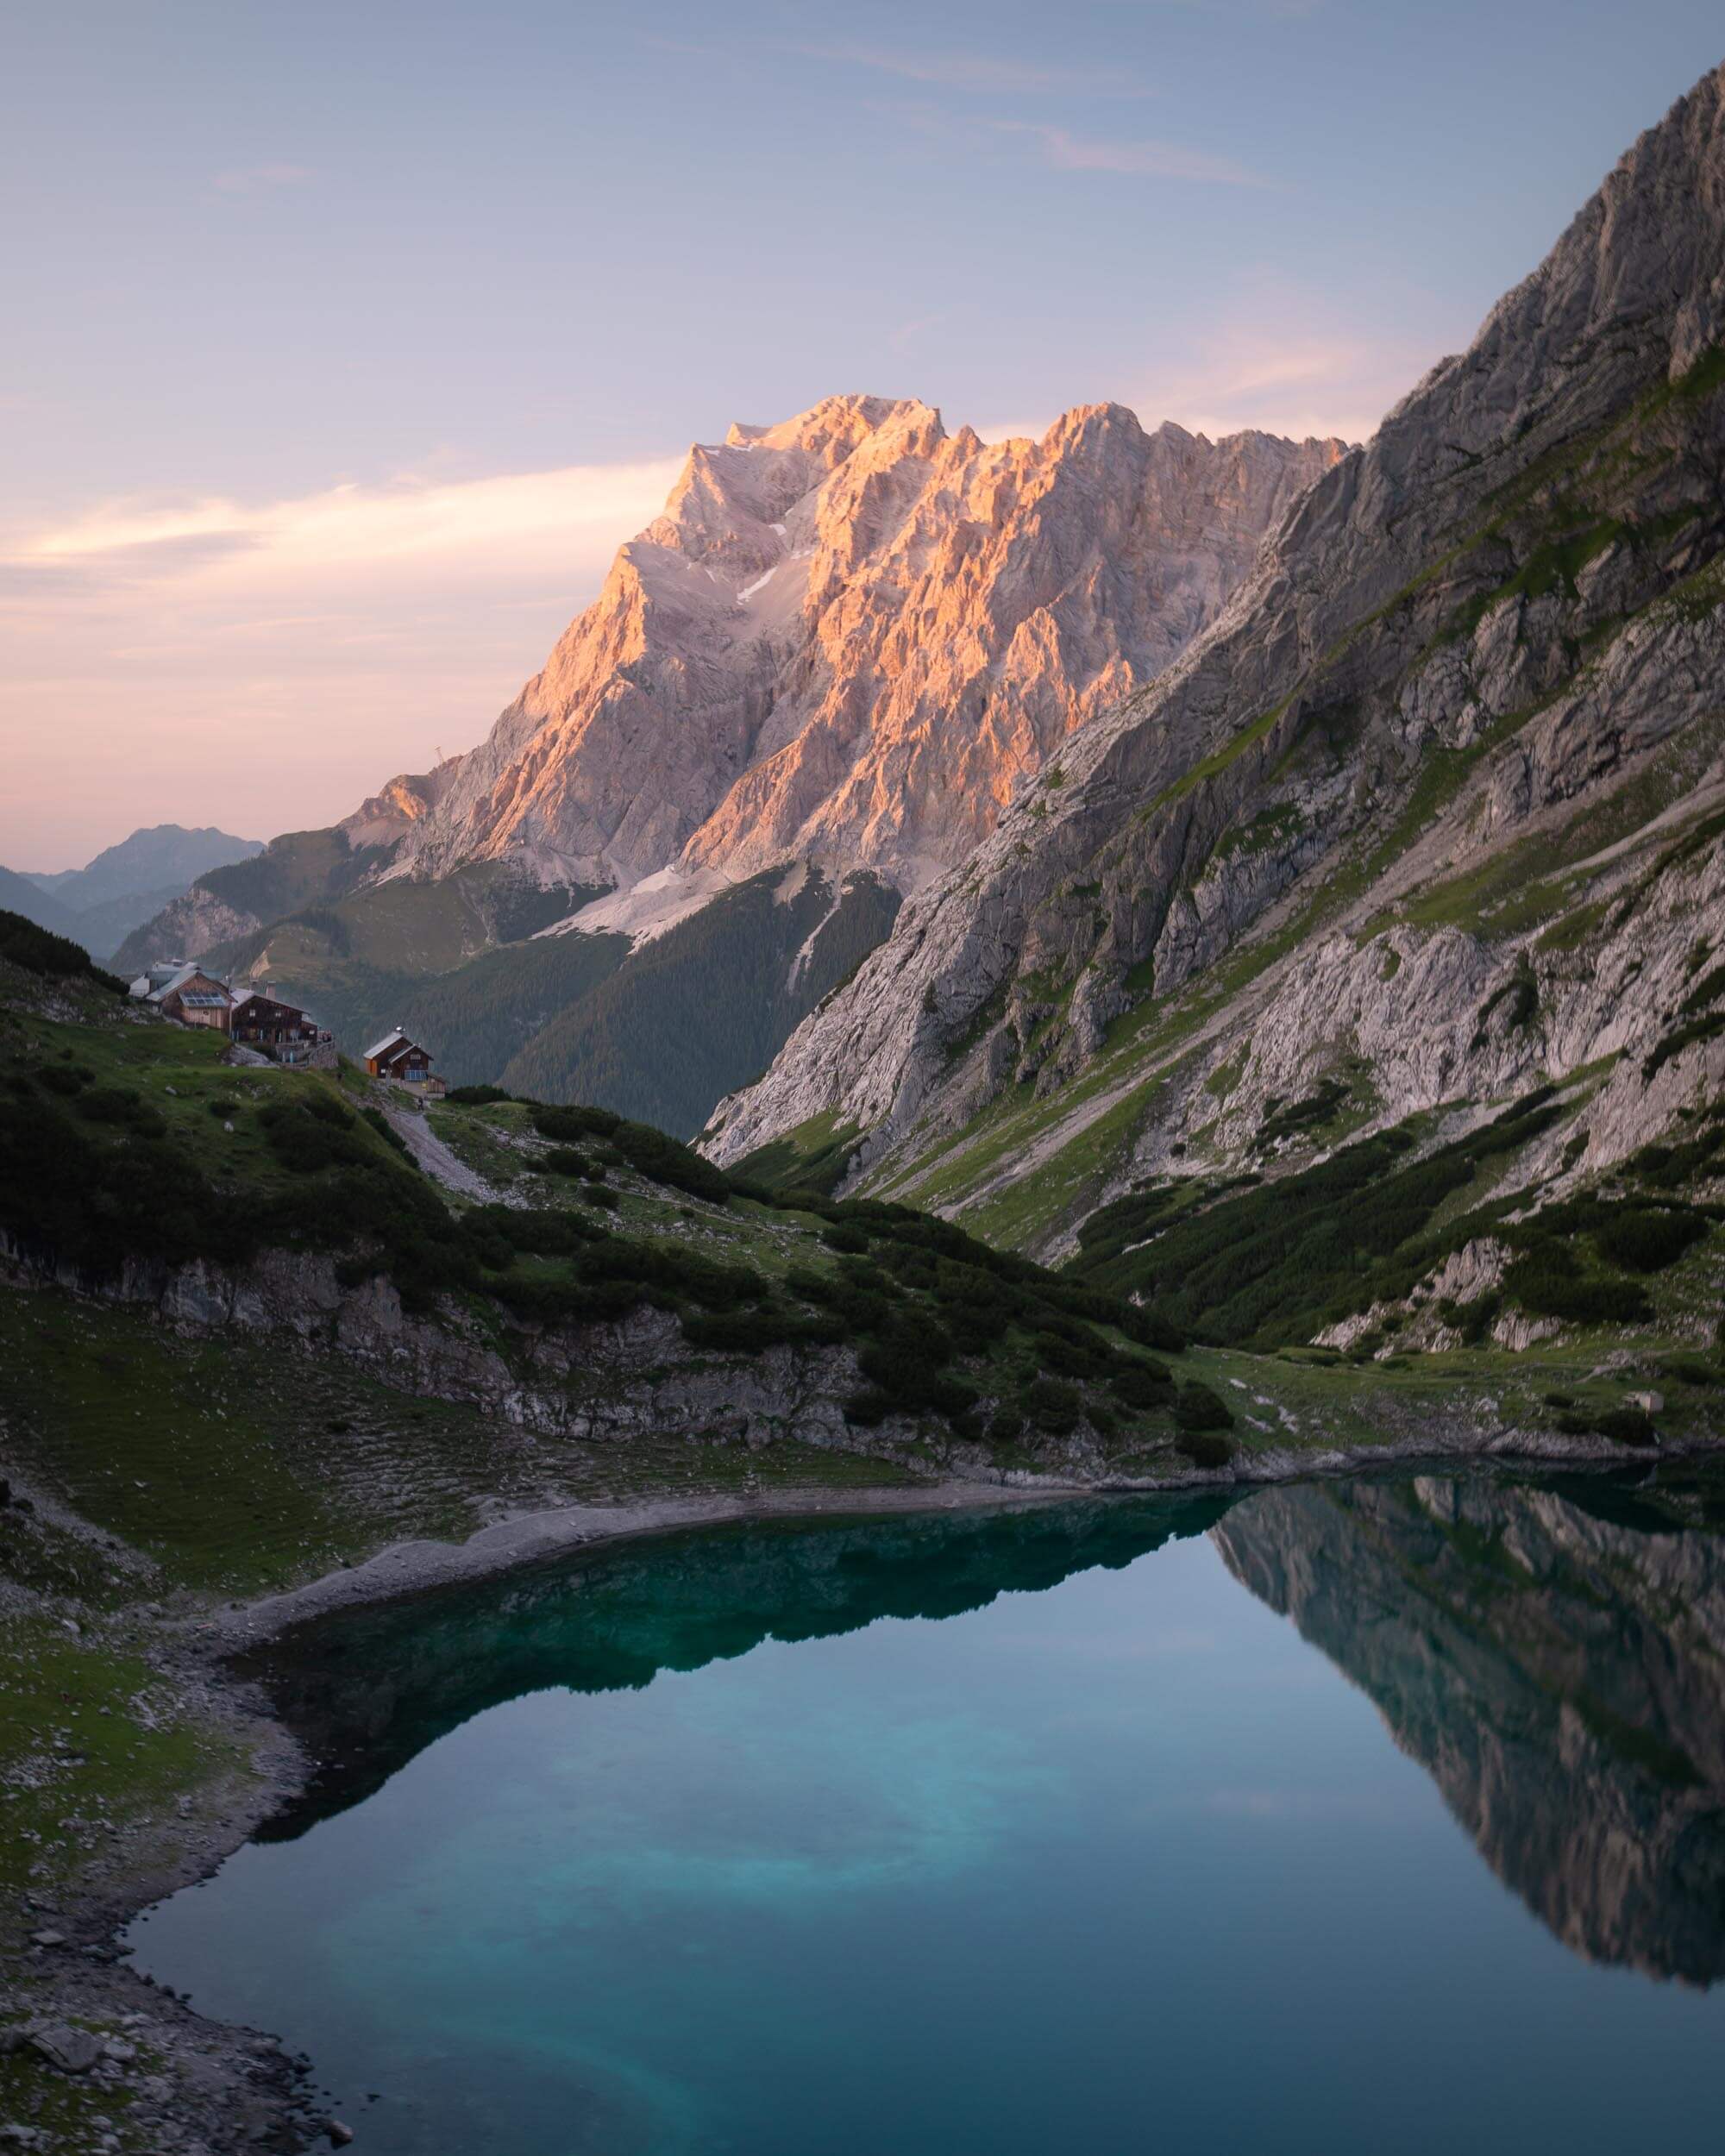 Drachansee in Austria at sunset. You can see Coburger Hütte on the opposite side of the lake. Make sure to get reservations well in advance if you’d like to stay there!